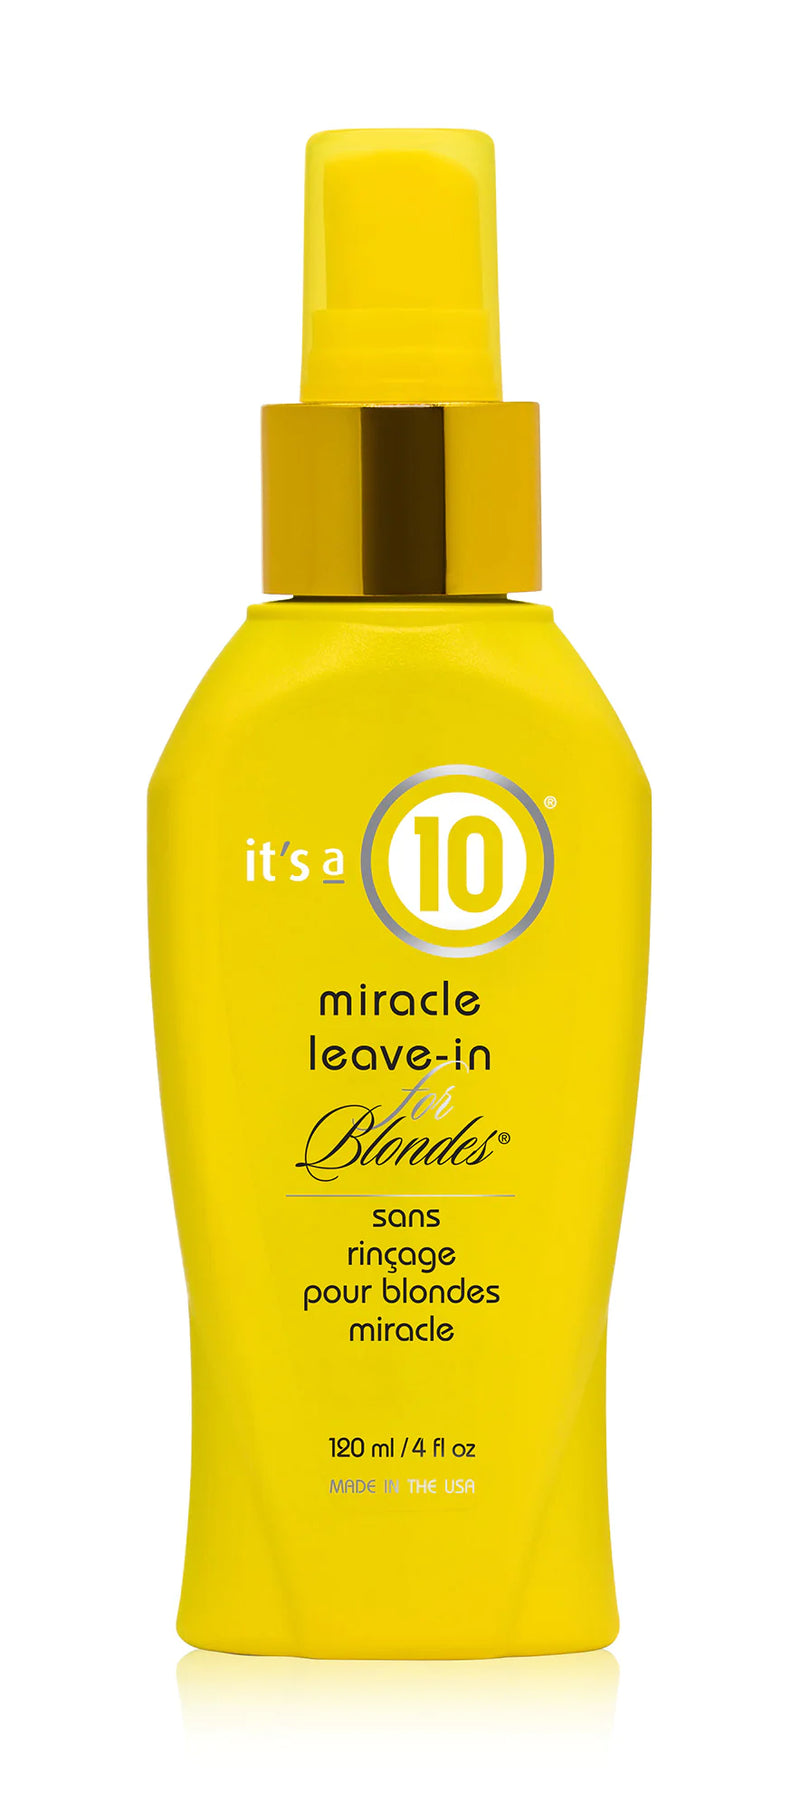 It's a 10 Miracle Leave-In For Blondes Conditioner - 4 fl oz